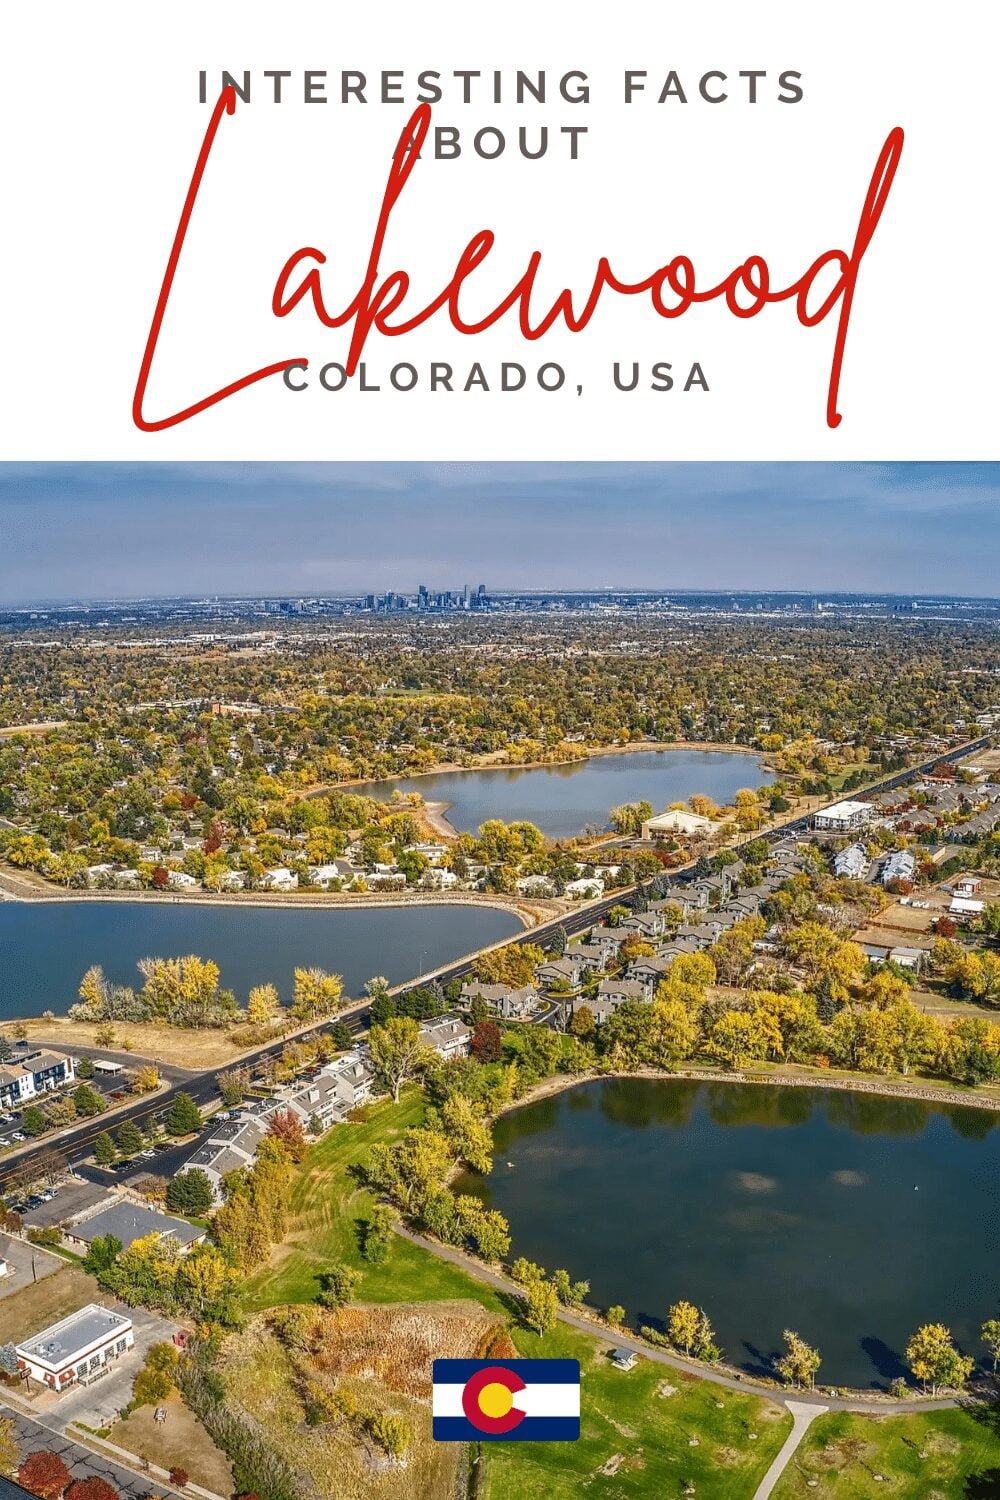 Facts About Lakewood, Colorado